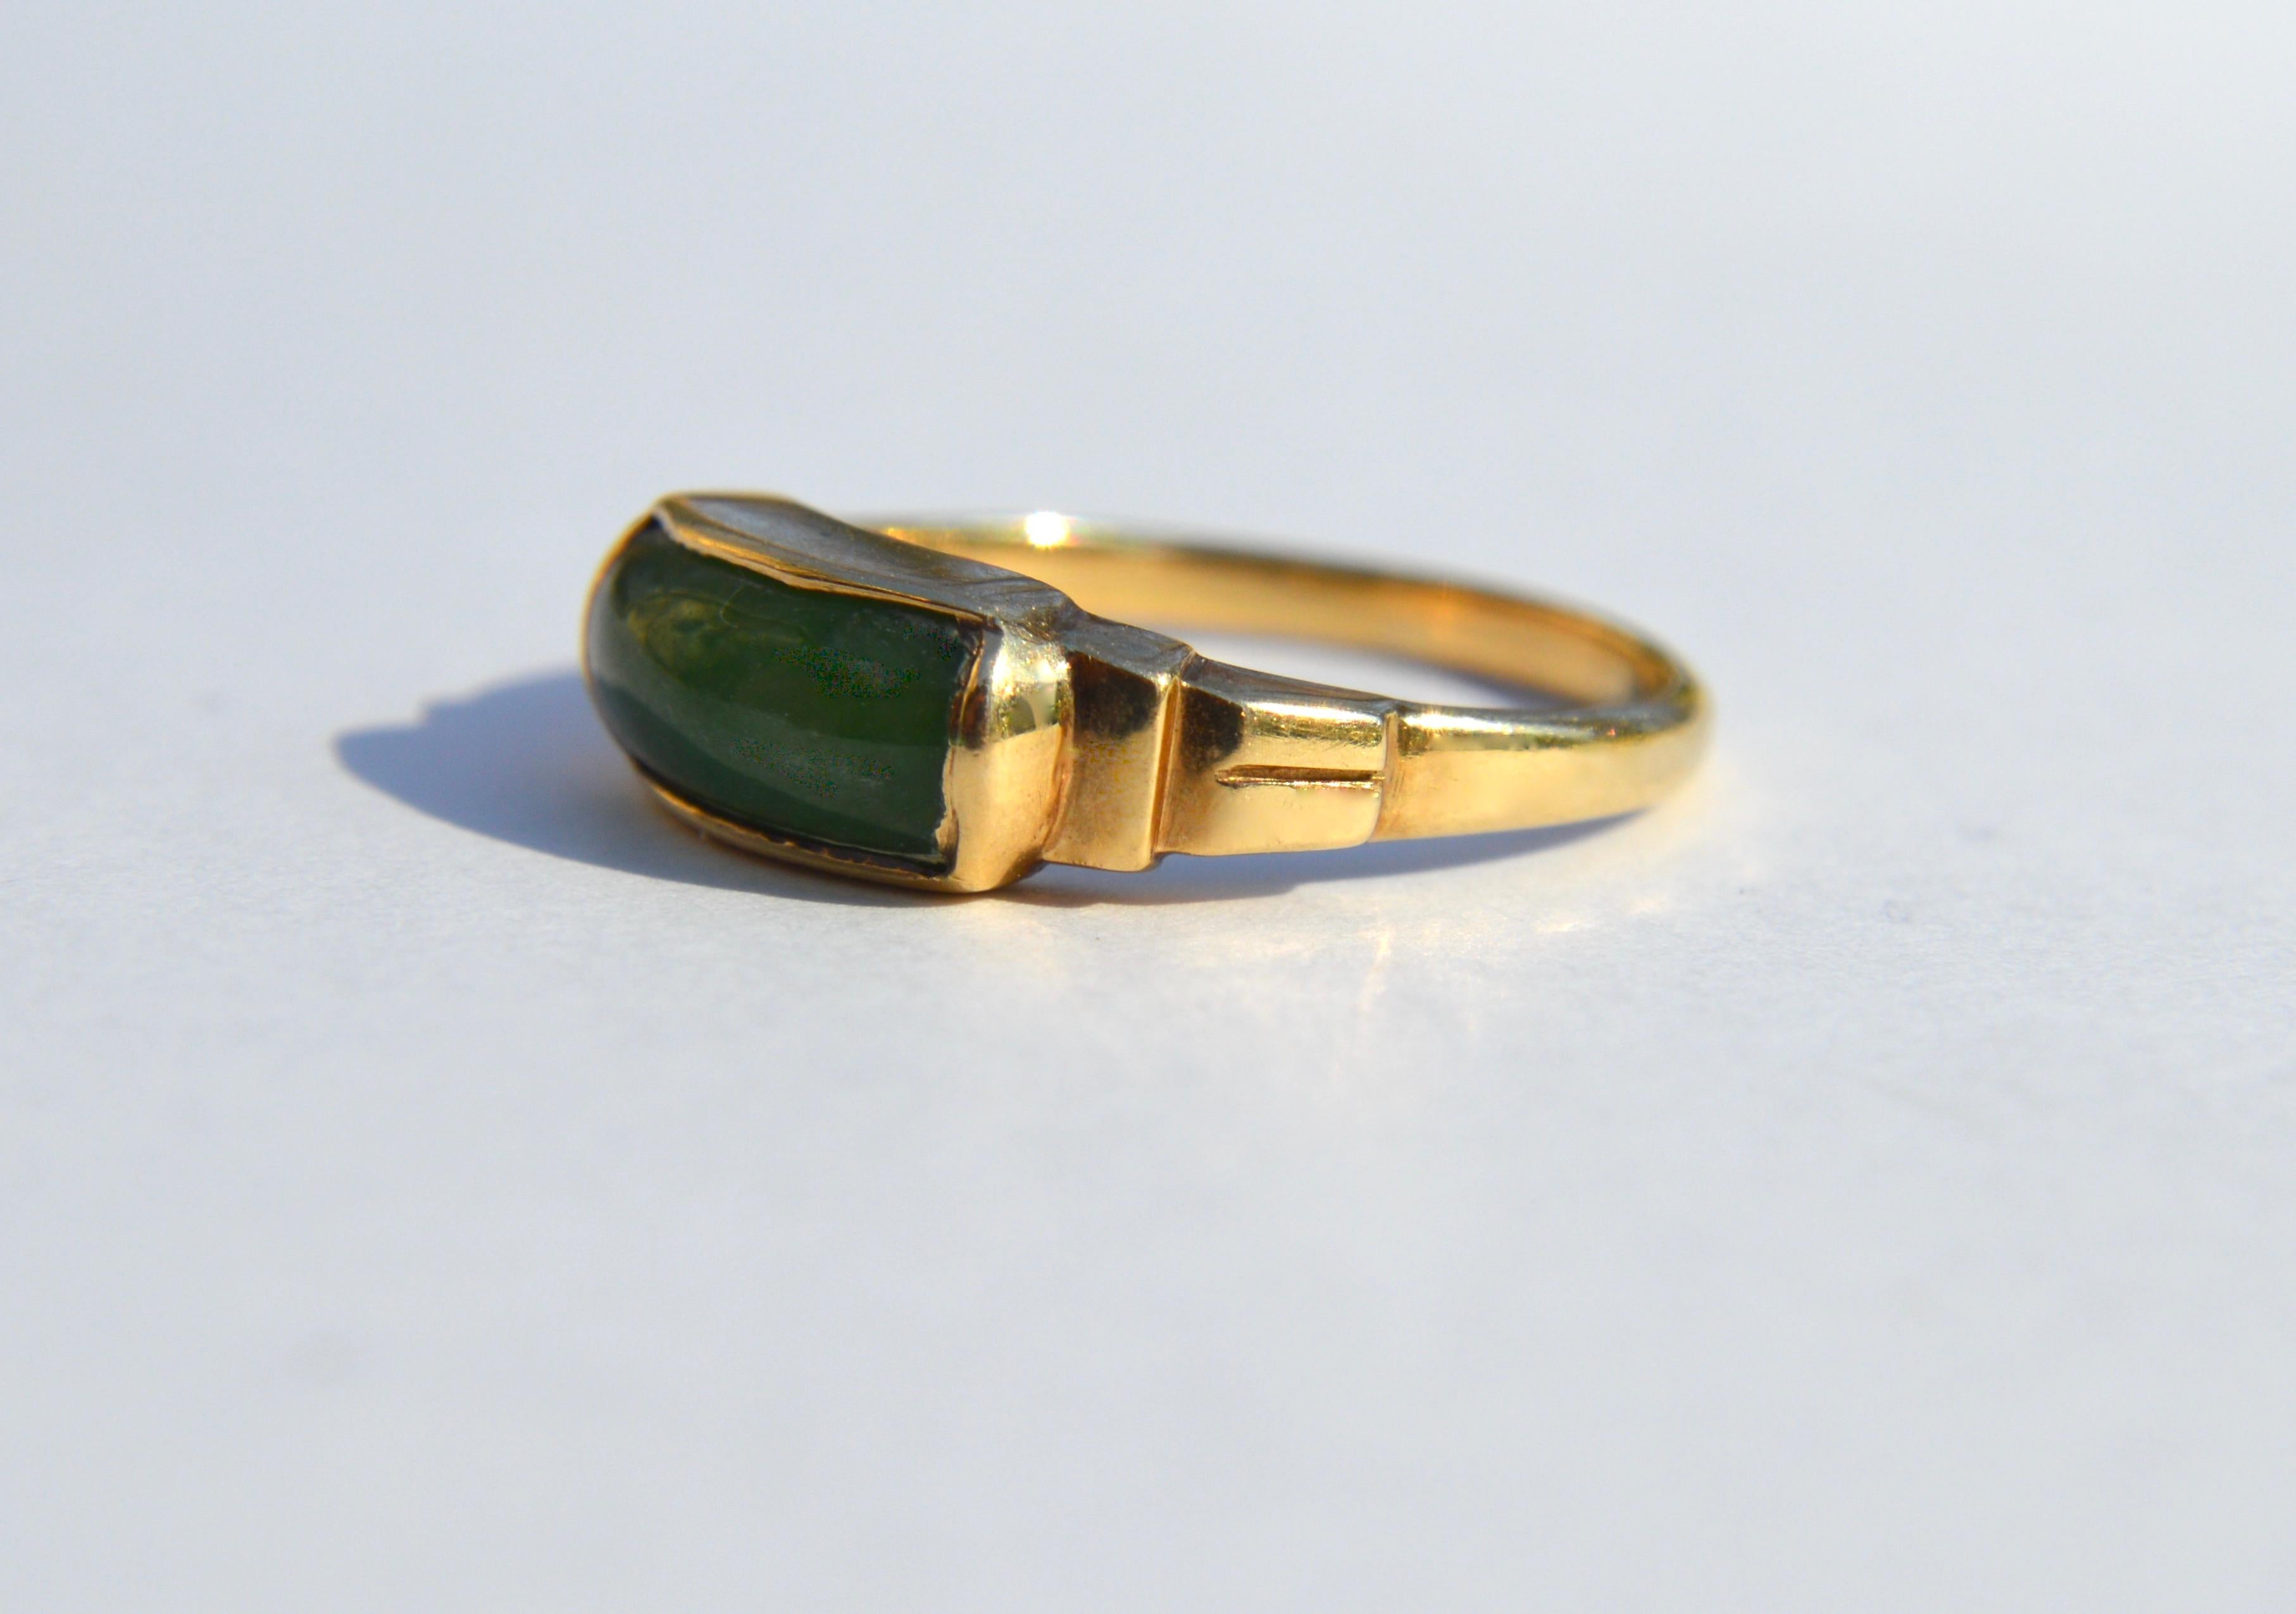 Gorgeous antique circa 1920s nephrite jade ring in solid 14K yellow gold. Size 6.25. Marked and tested as solid 14K. In very good condition. Jade measures 11x5mm. Ring weighs 2.95 grams. Perfect addition for your ring stack.

All items arrive in a